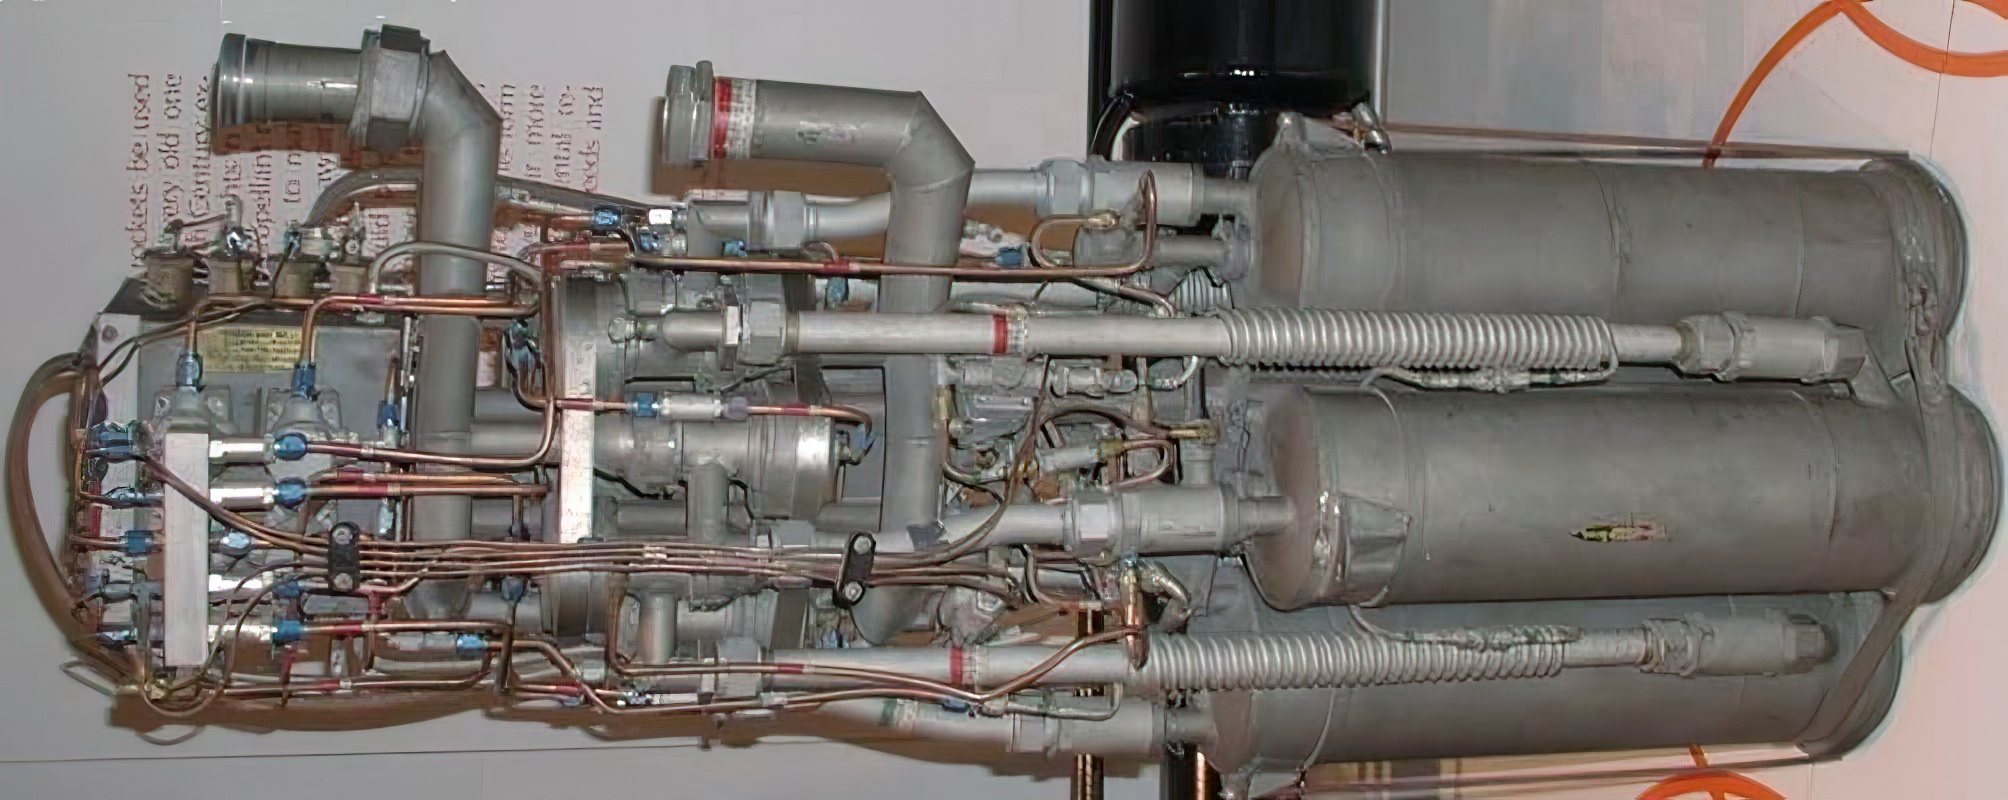 XLR-11 rocket engine on display at the National Air and Space Museum